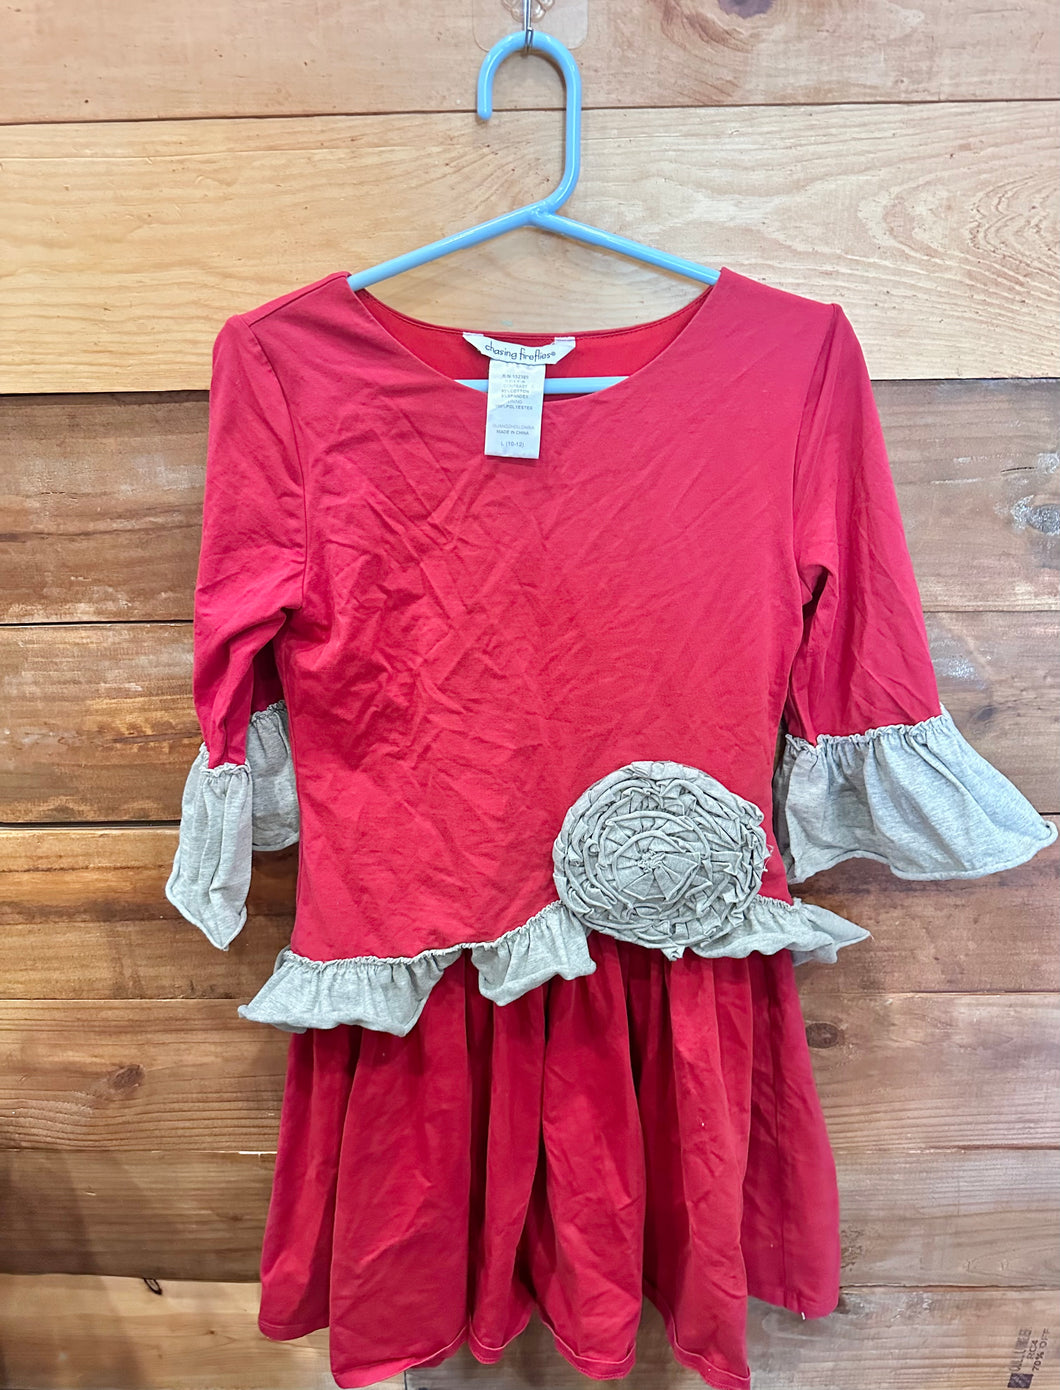 Chasing Fireflies Red Dress Size 10-12